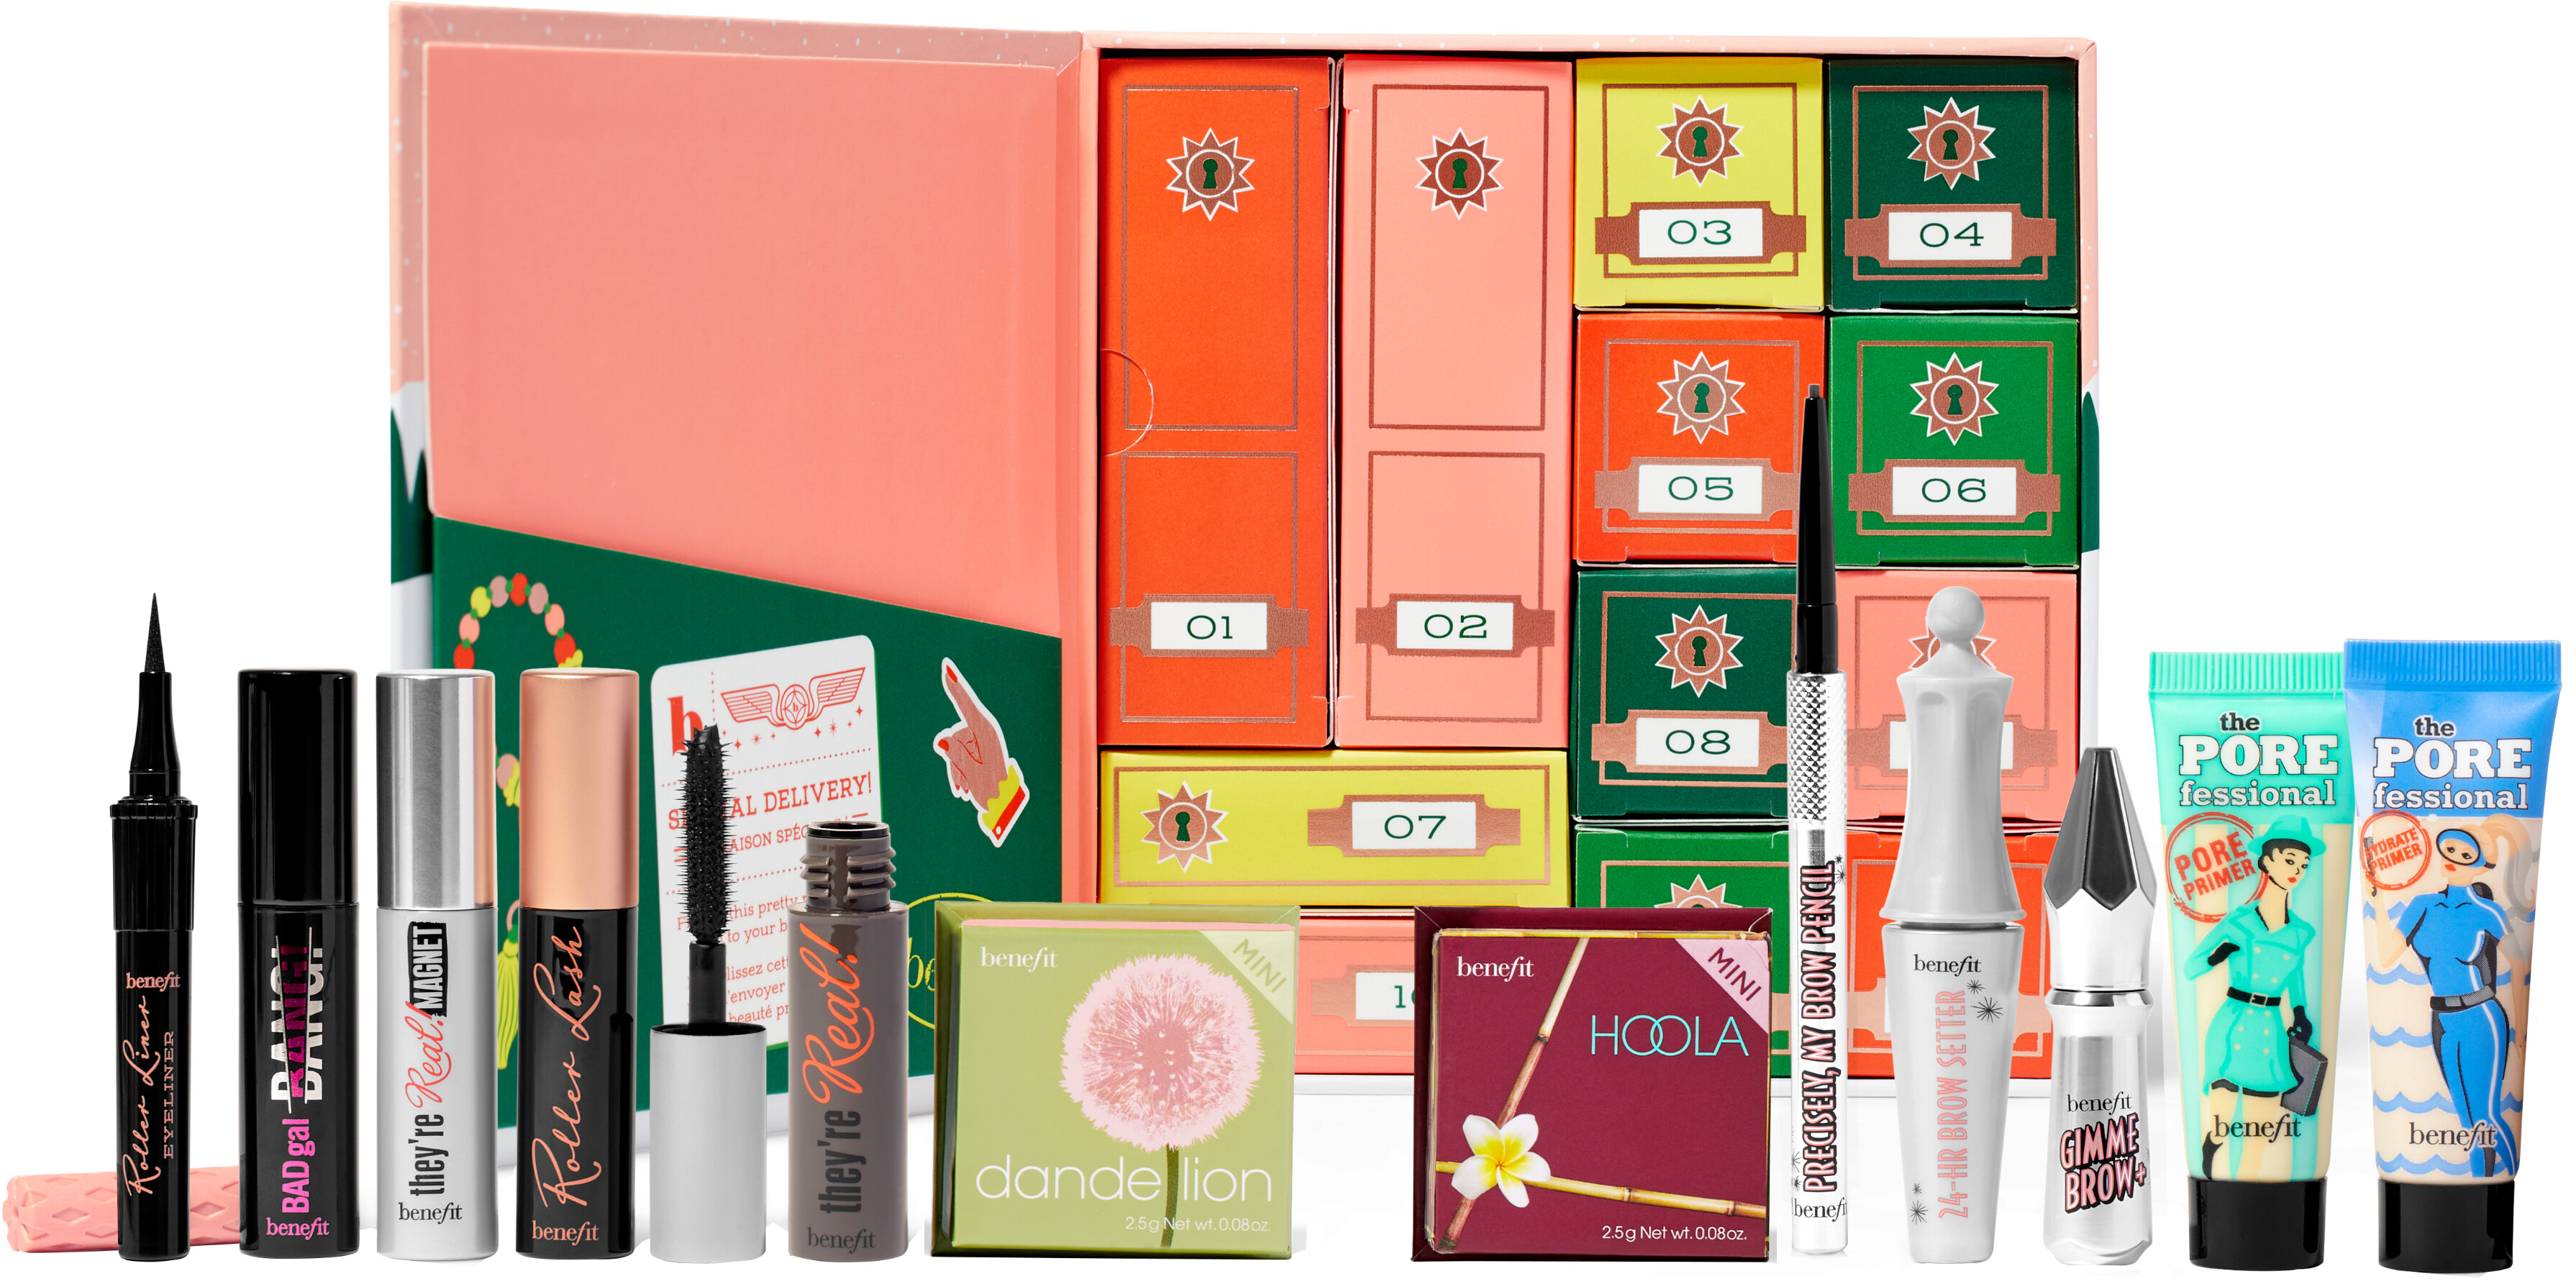 Sincerely Yours, Beauty Advent Calendar